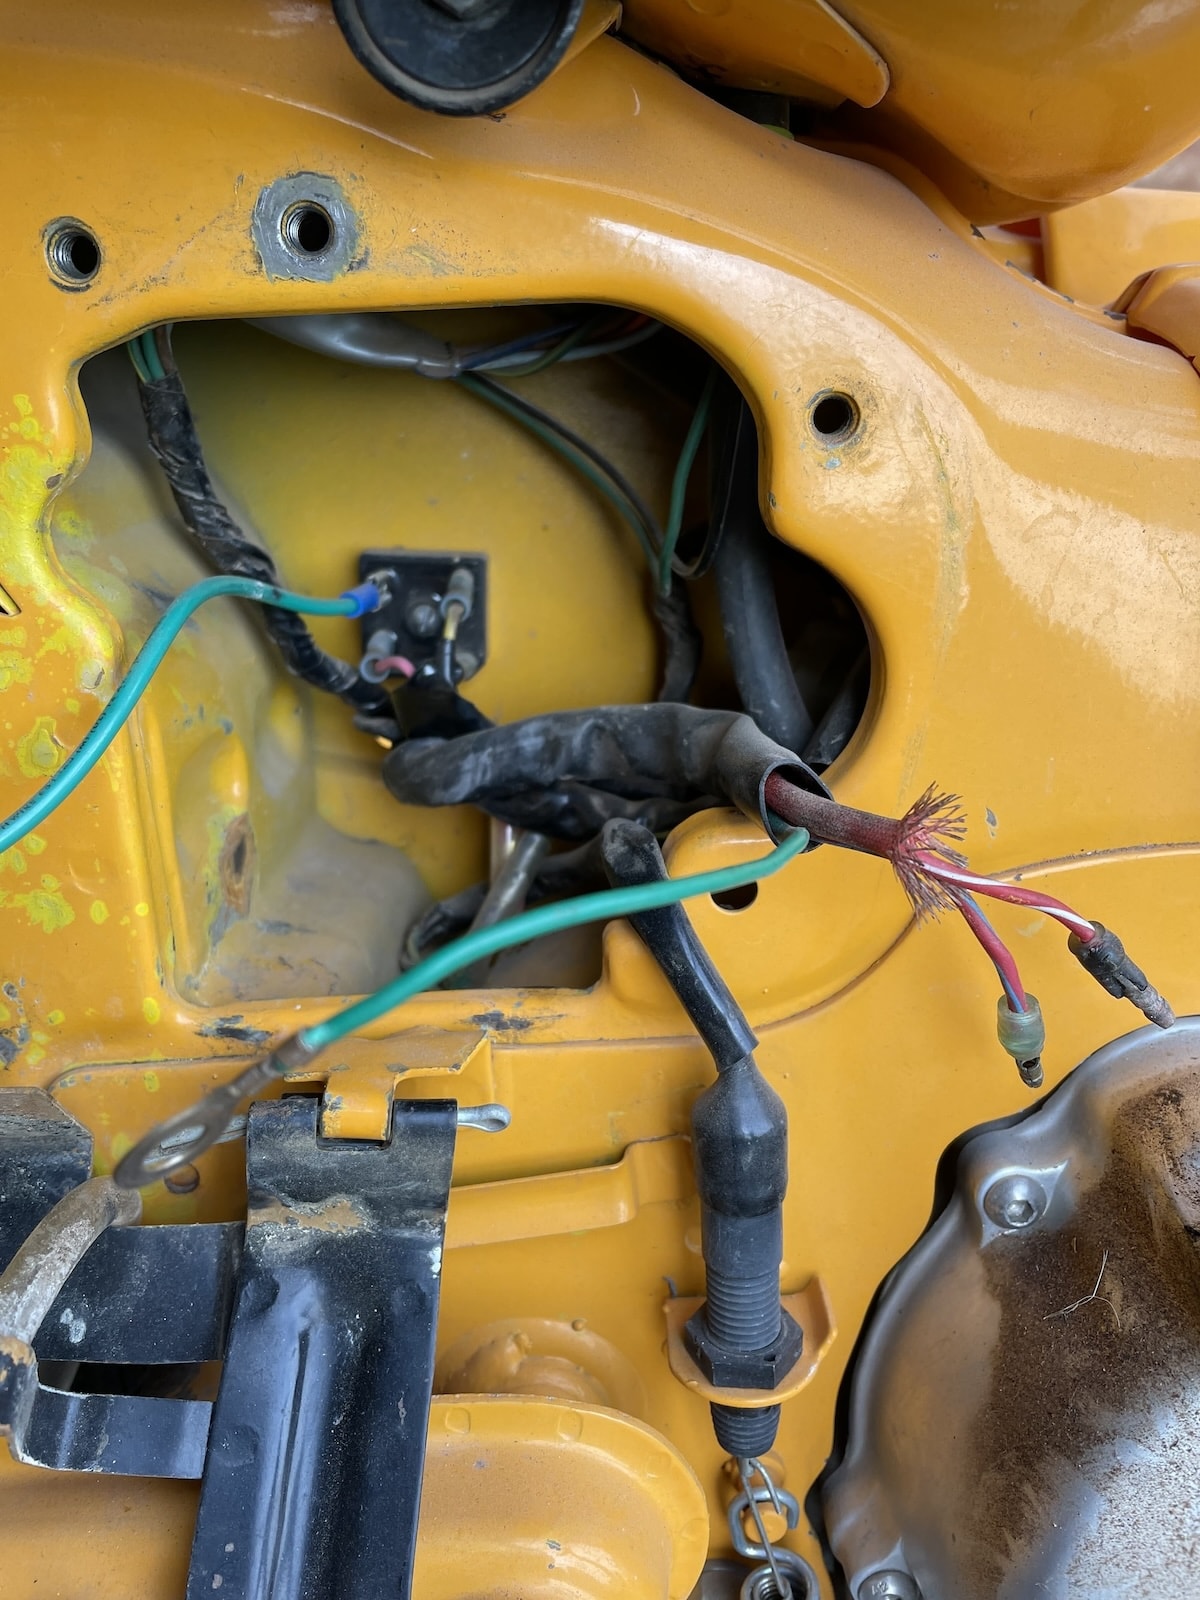 Photograph of the wiring on a Honda Trail CT90